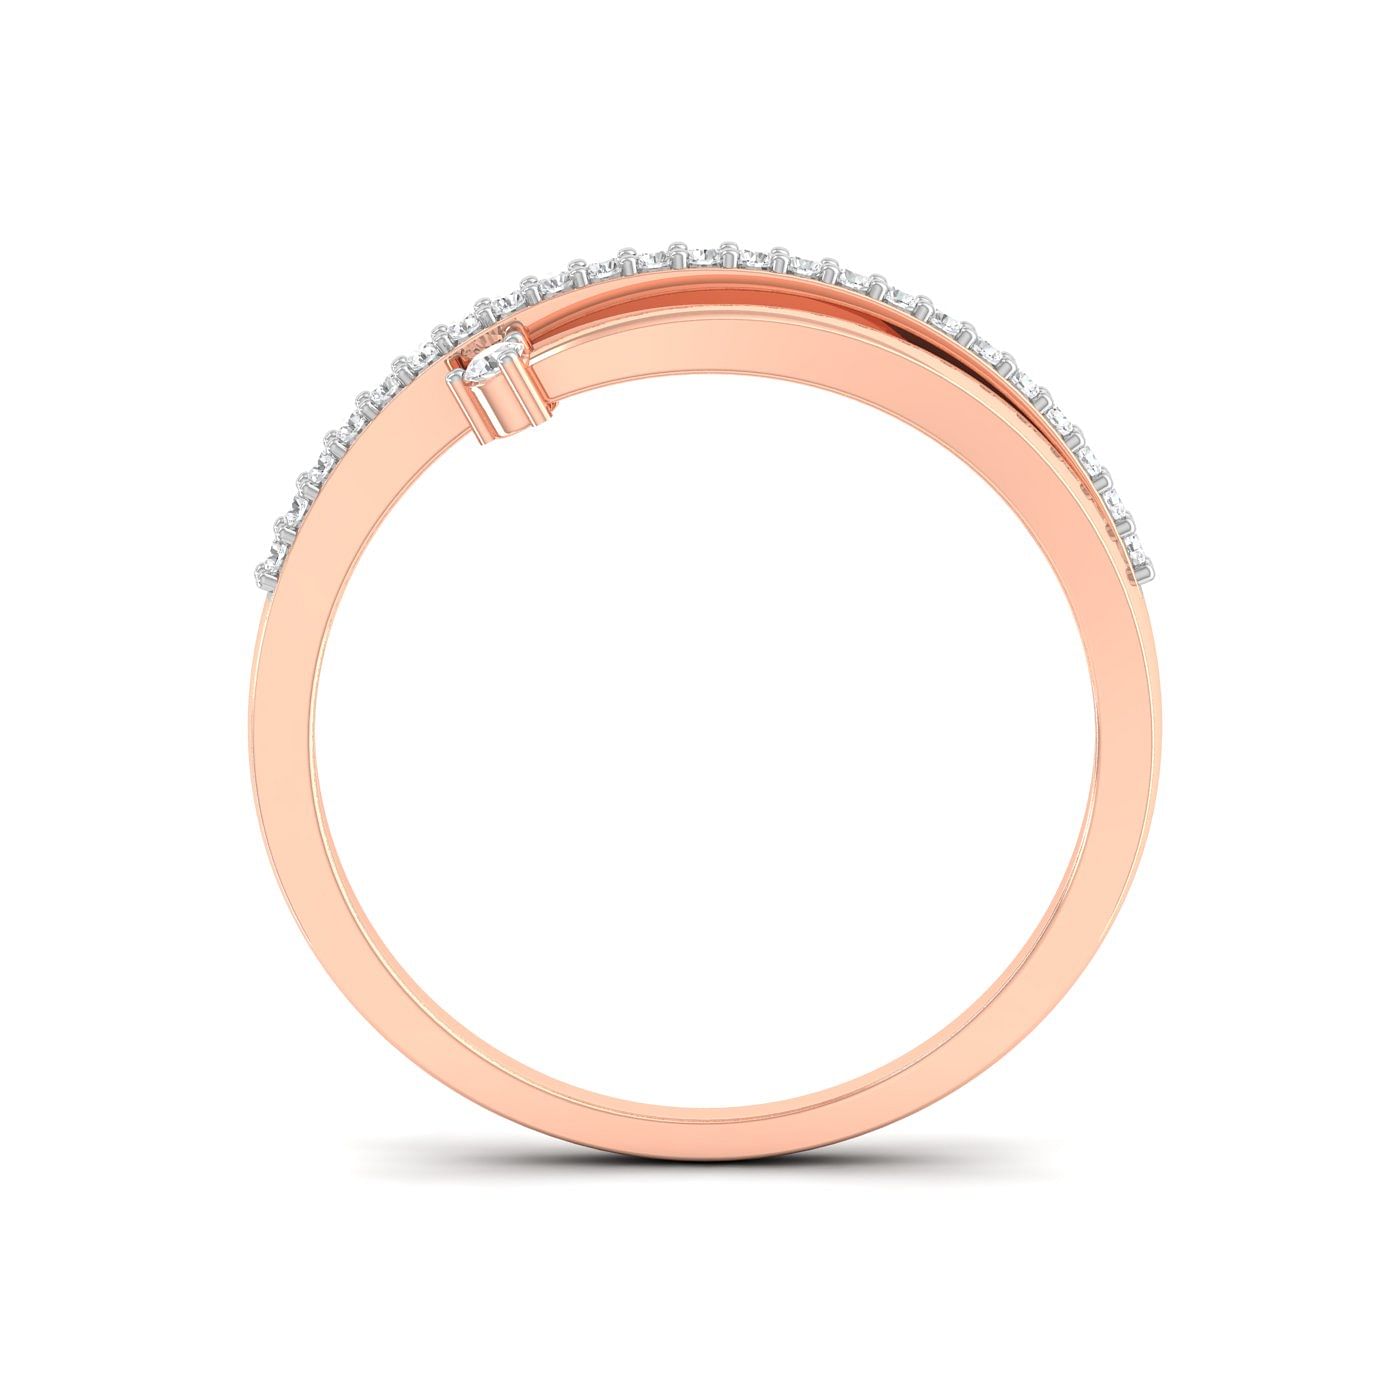 Half Eternity Spring Diamond Ring With Rose Gold For Gift For Her